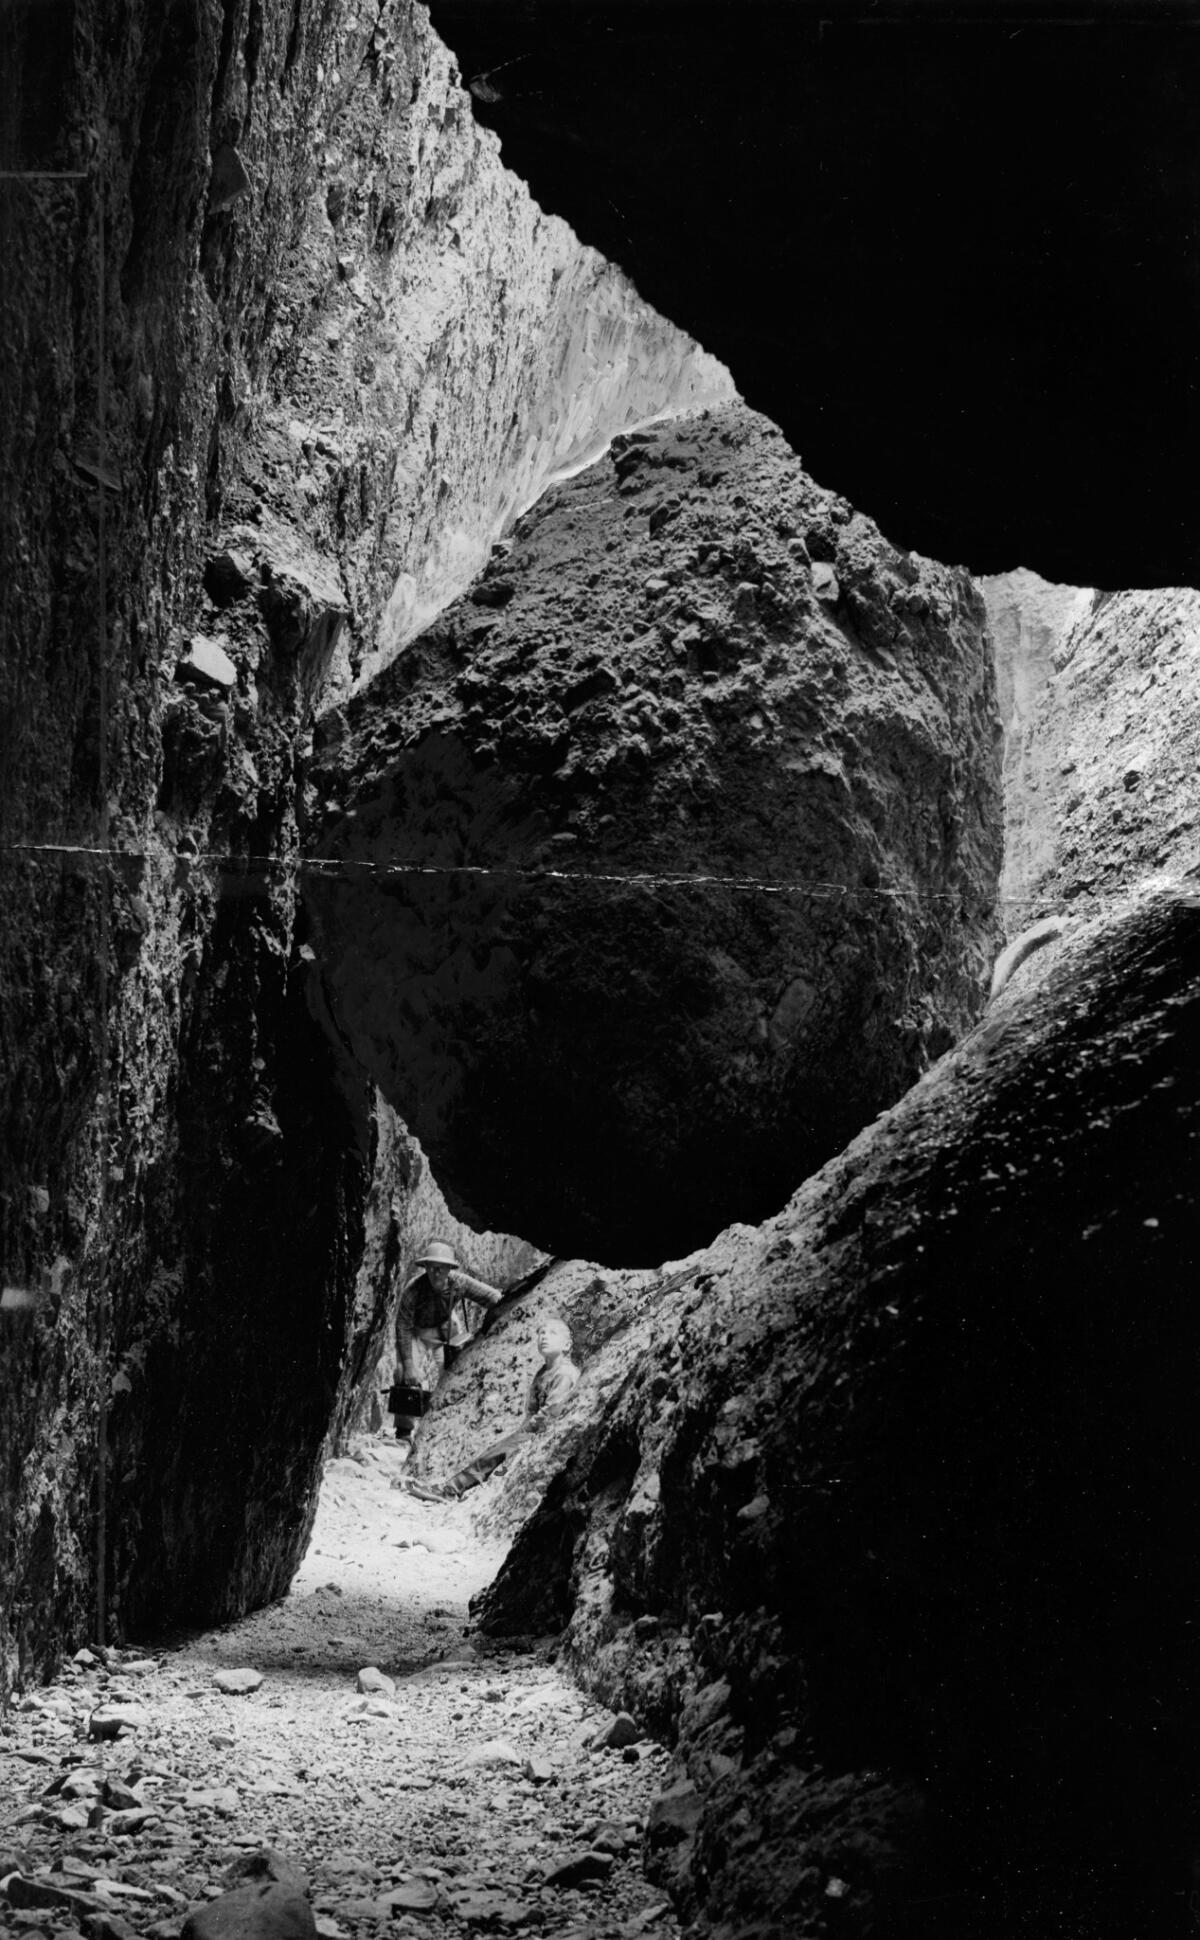 Boulders, some weighing 50,000 tons, stick between walls in Pinnacles Monument. April 11, 1954. (Los Angeles Times Library)